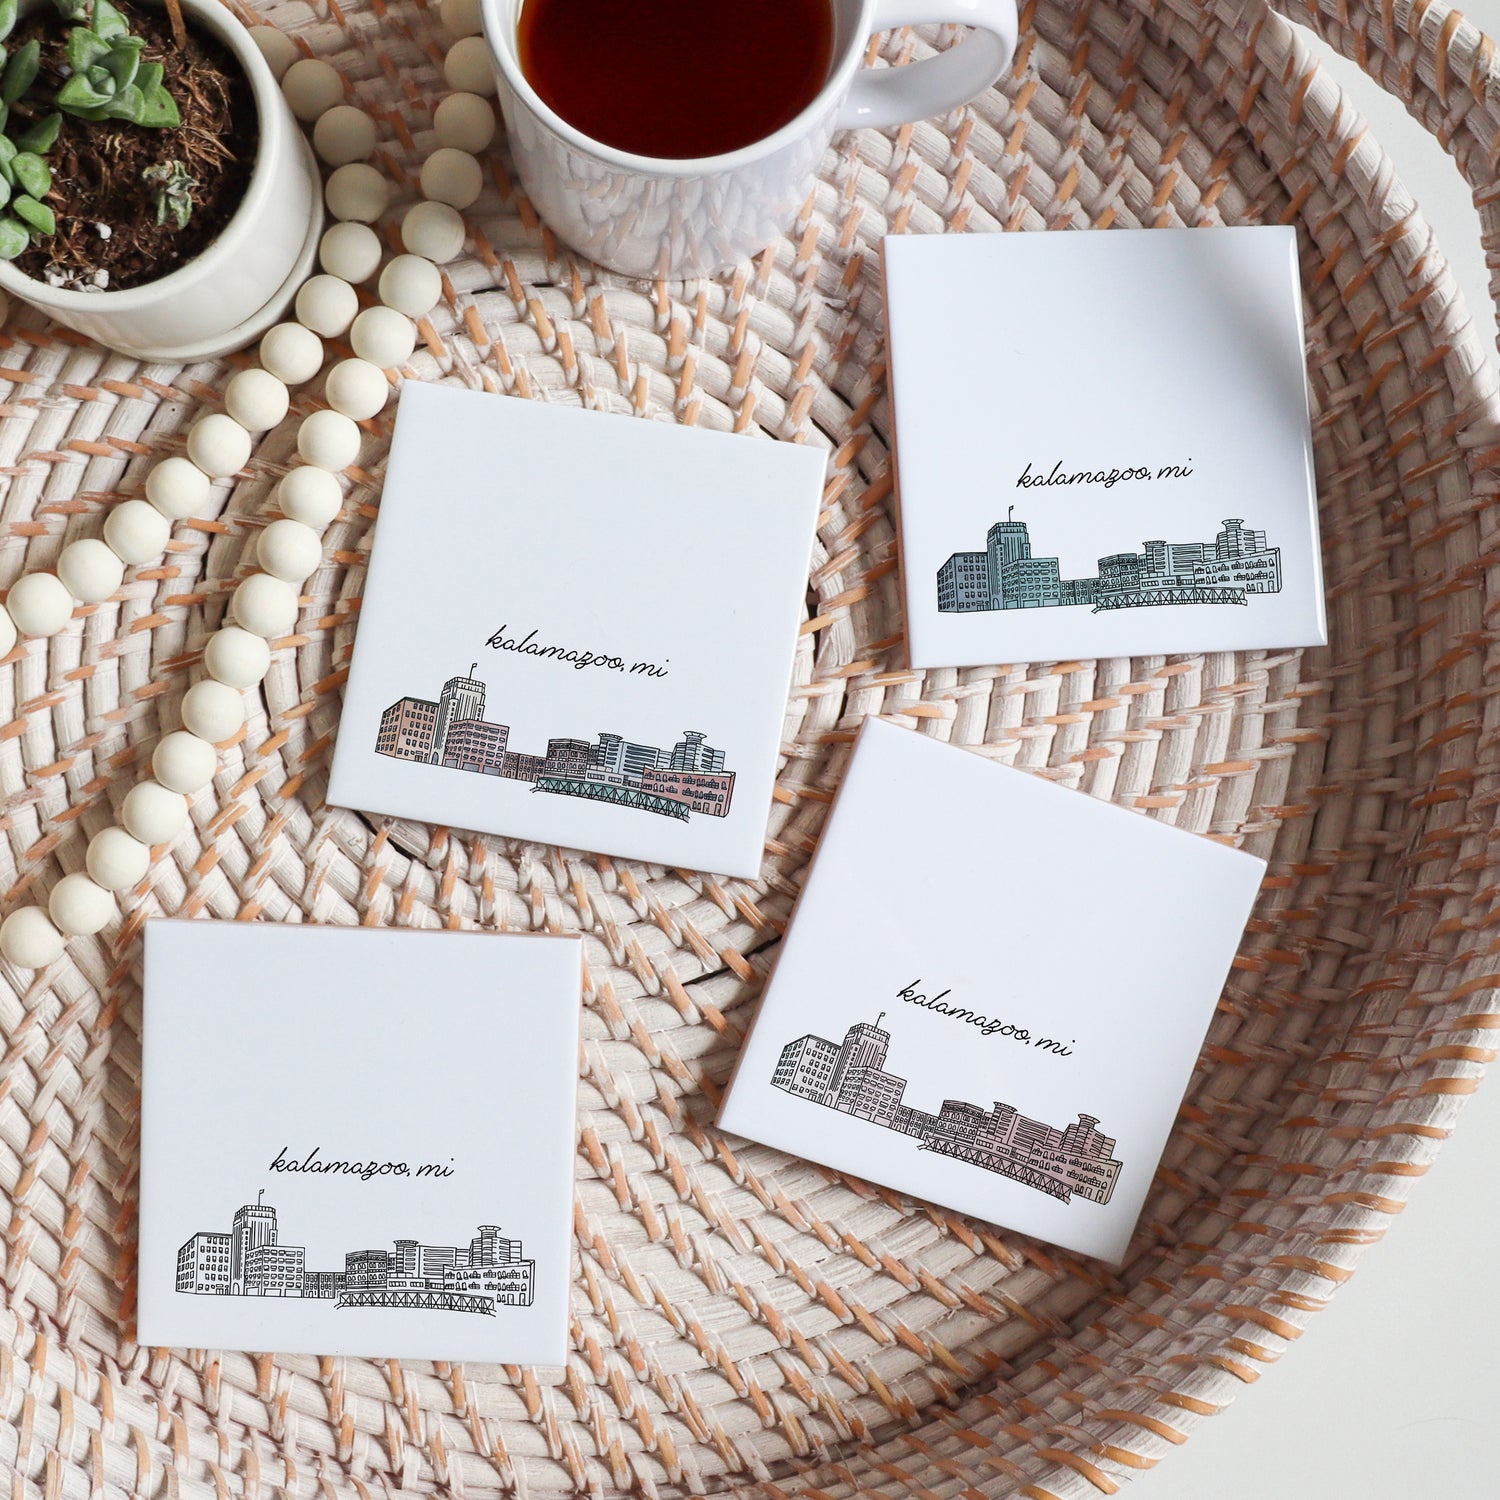 Skyline drawing of Kalamazoo Michigan on a set of ceramic coasters sitting on a serving tray with a cup of tea